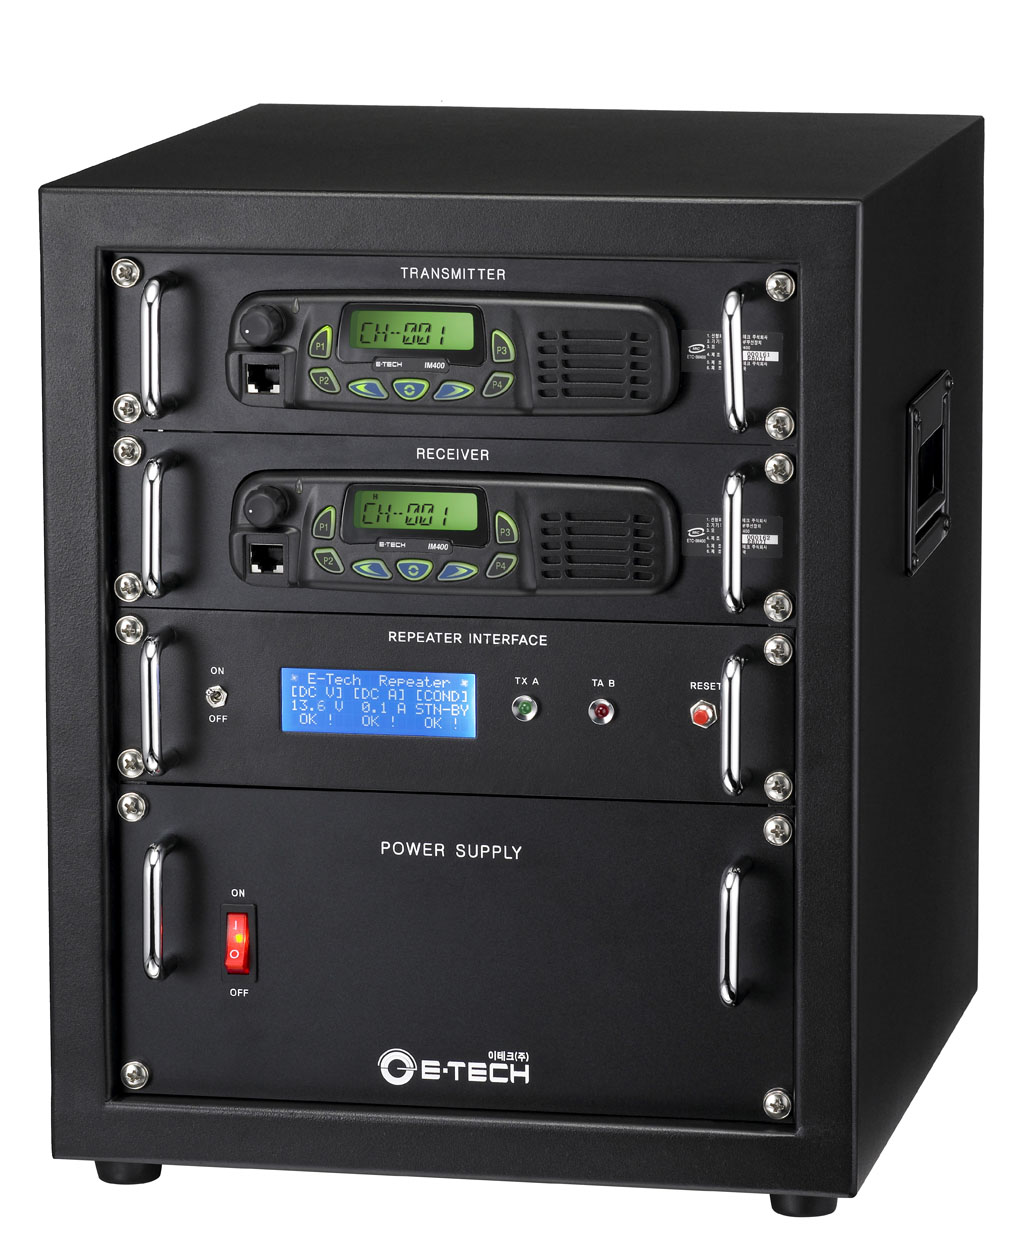 Repeater Series Vhf Uhf Version Desktop Repeaters Offers Unmatched Features And Performance 